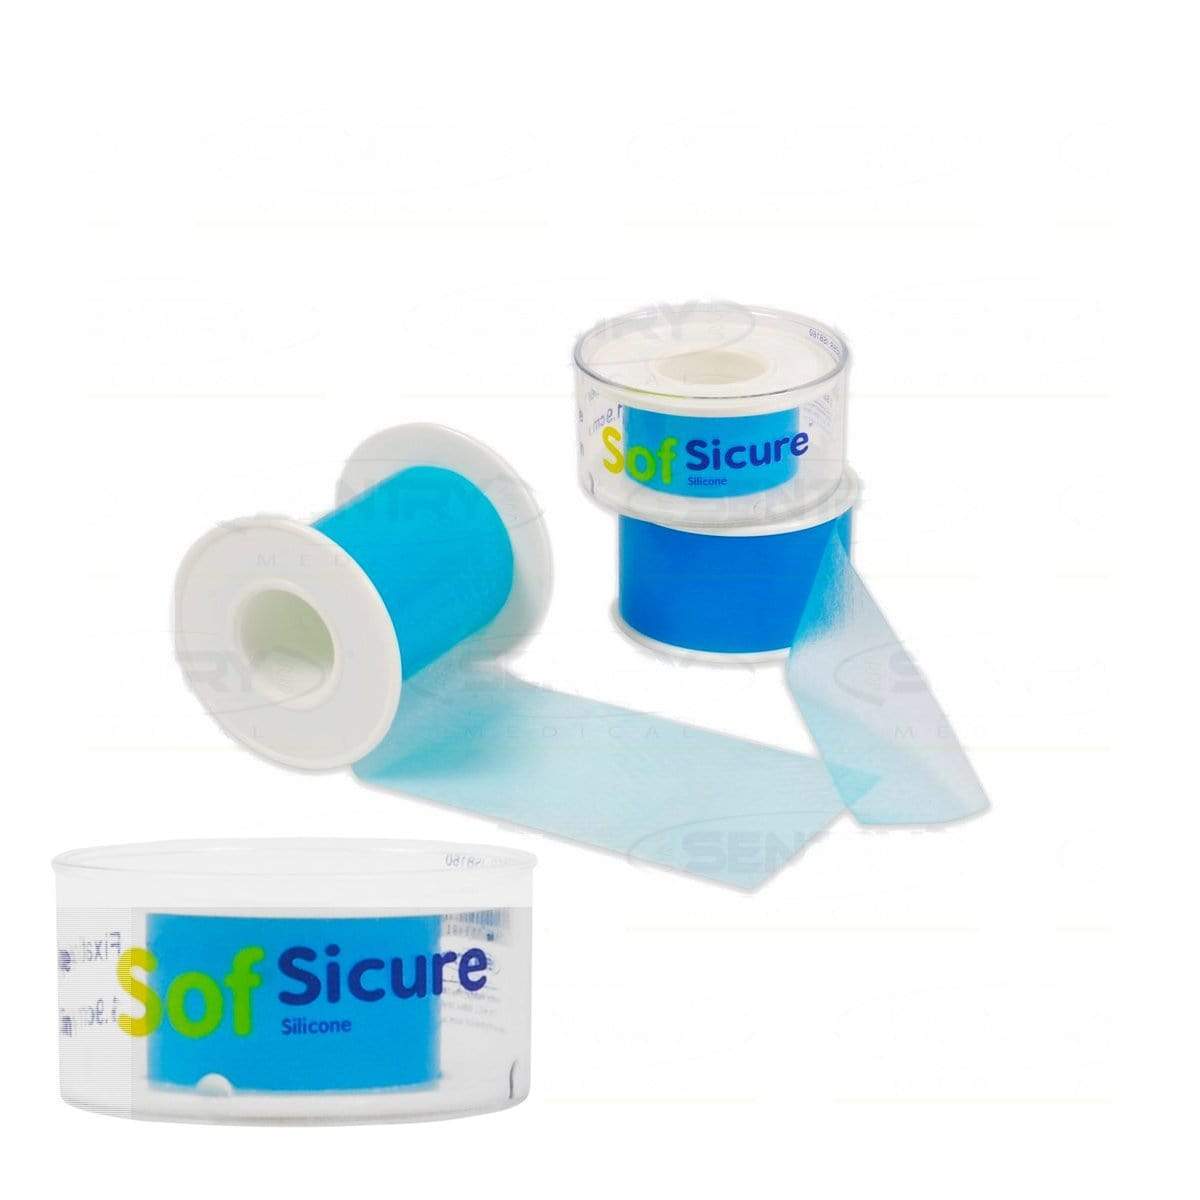 Sentry SofSicure Silicone Fixation Tape